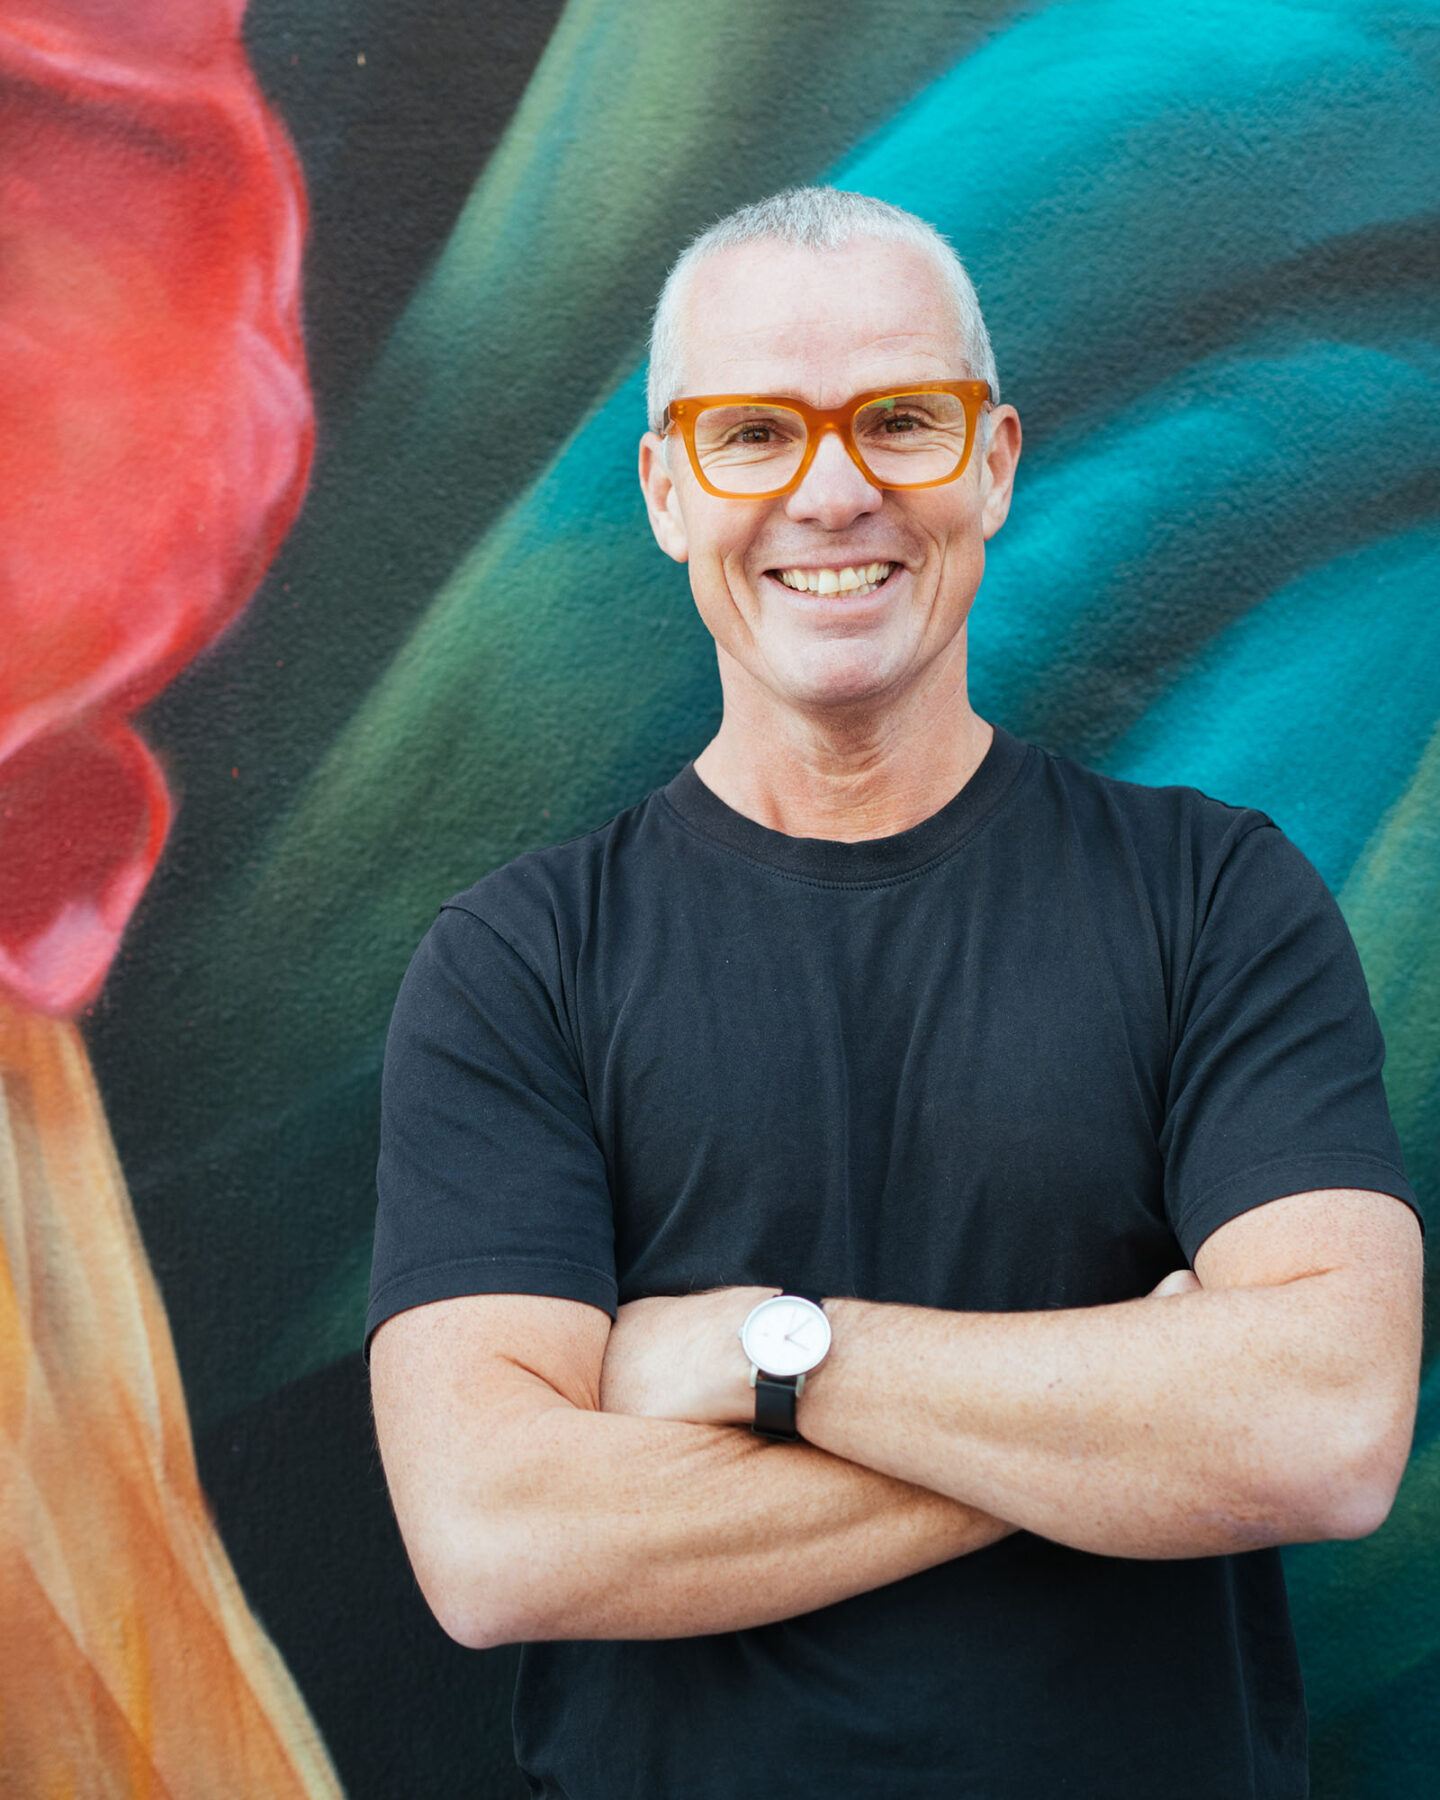 A man with short gray hair and red-rimmed glasses stands arms-folded and smiling in front of a colourful artwork.